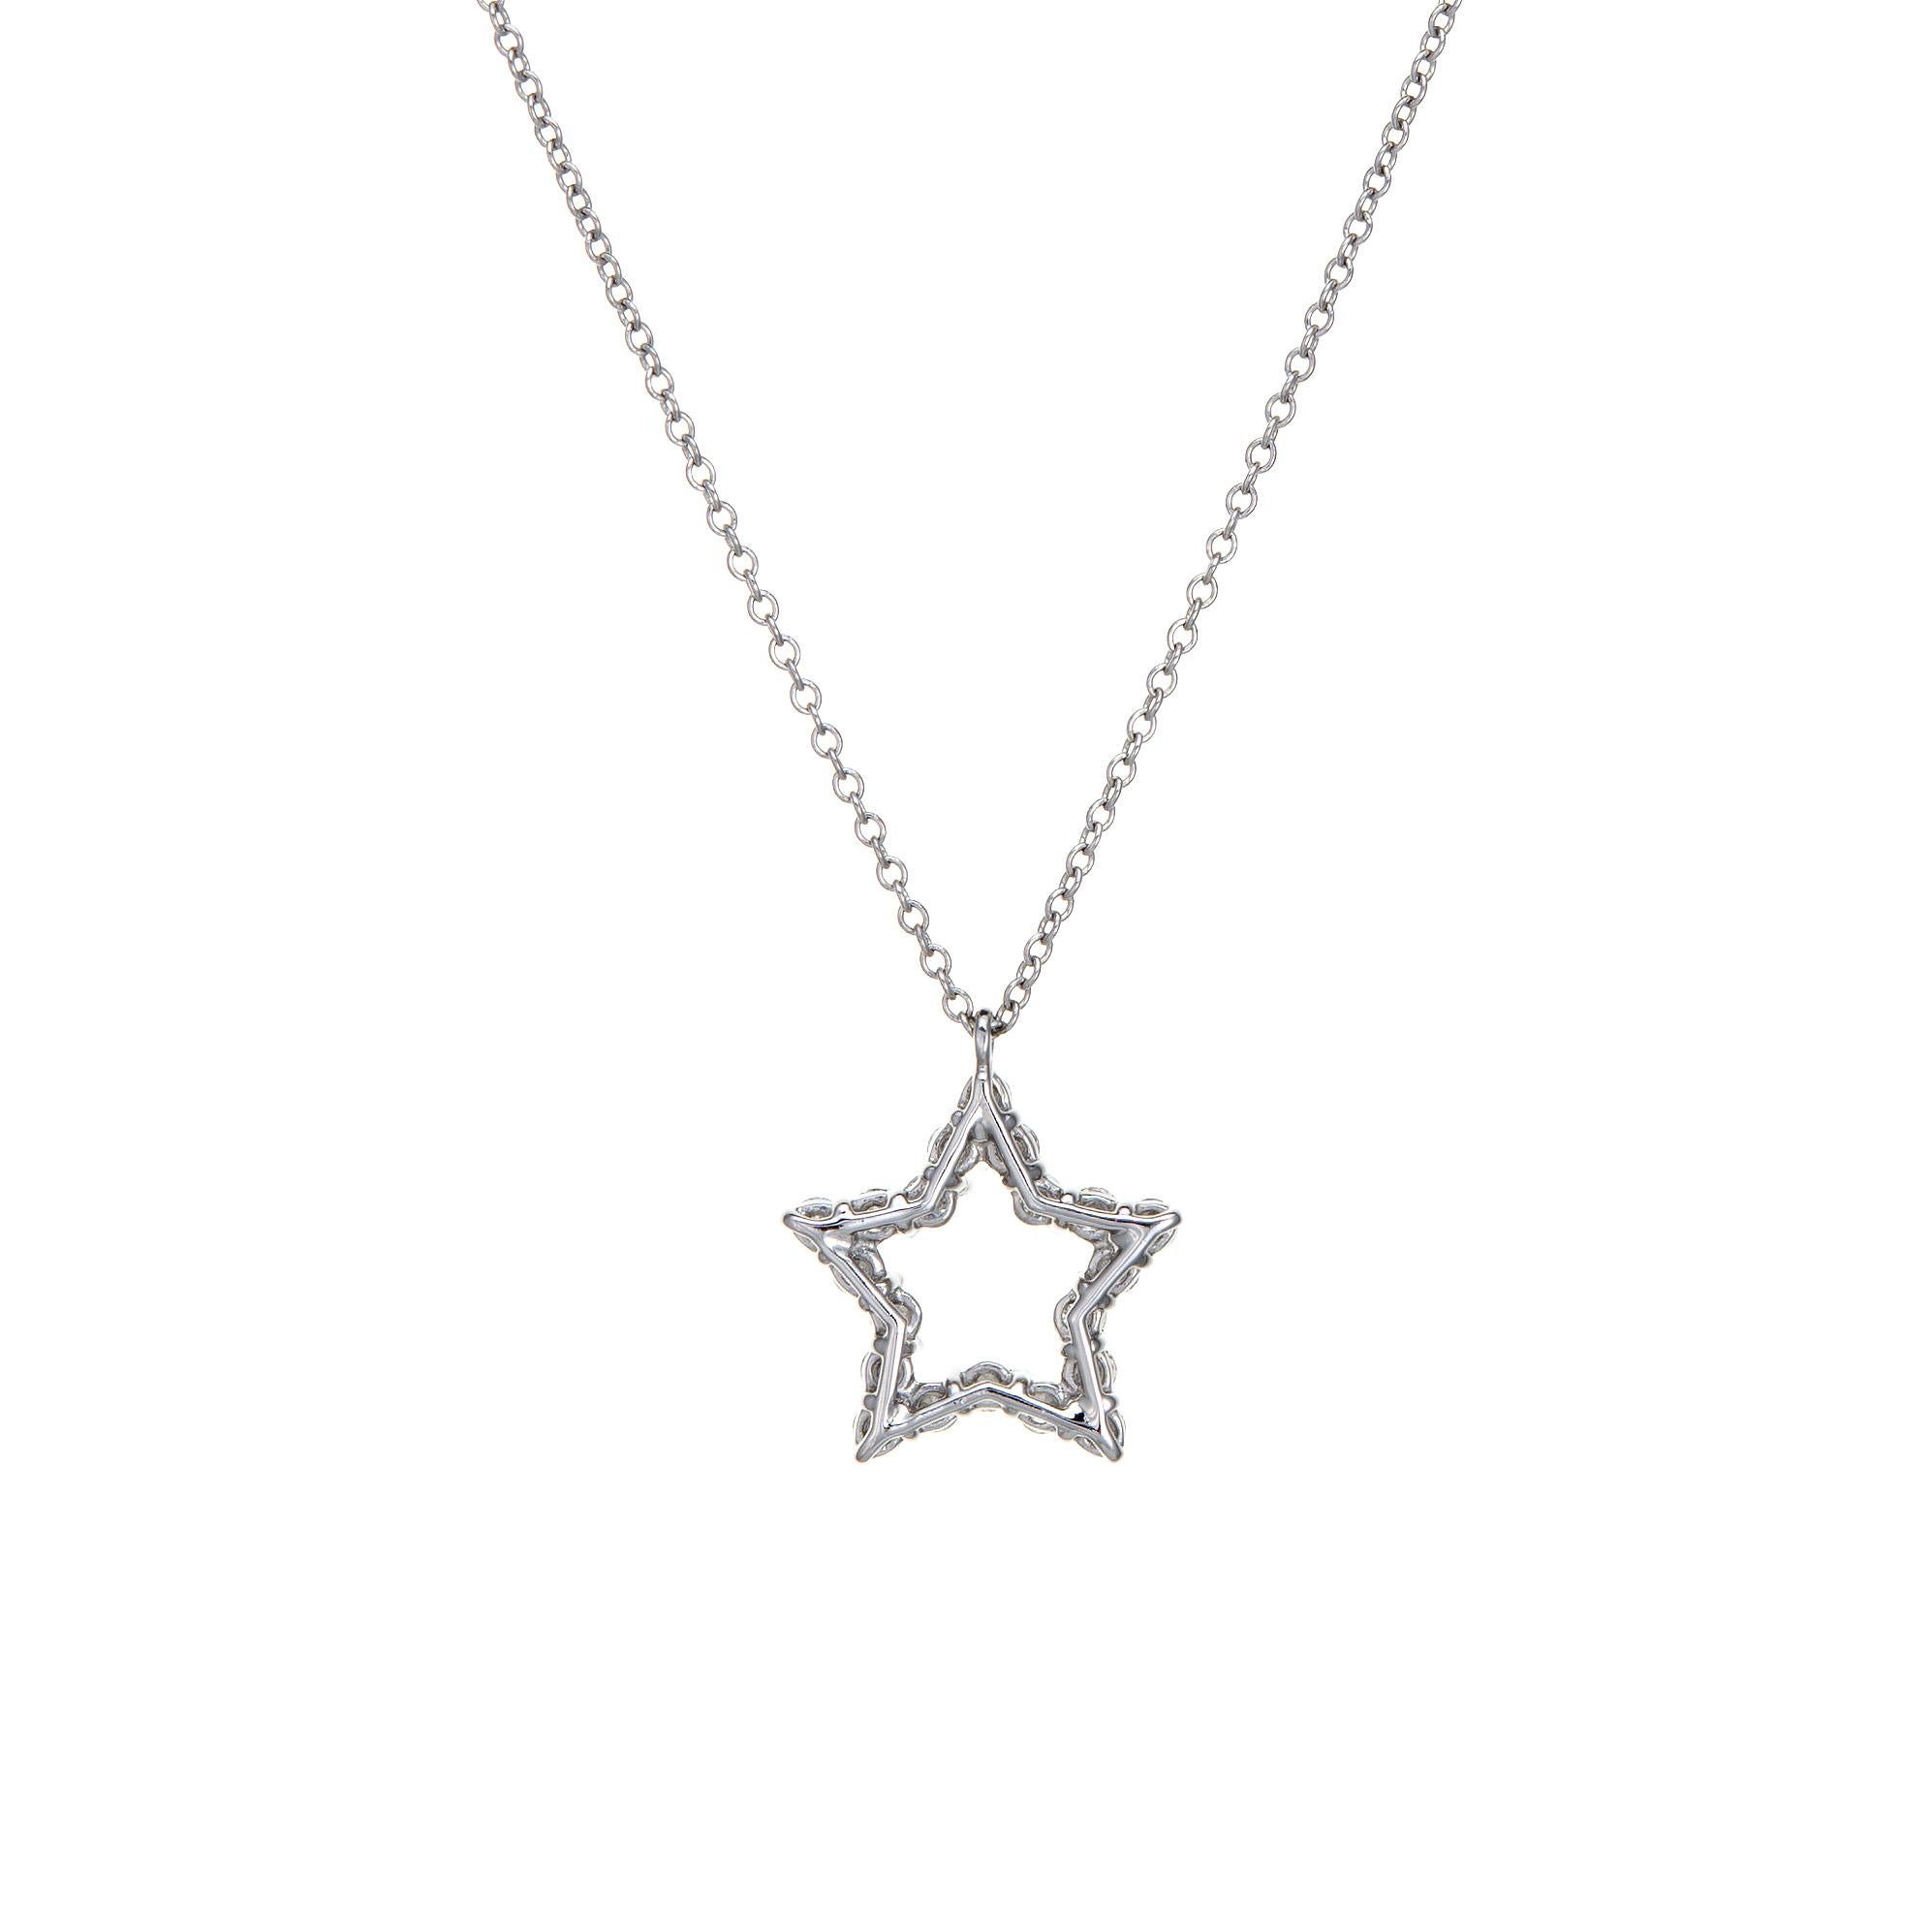 Stylish and finely detailed pre-owned Tiffany & Co diamond star necklace crafted in 950 platinum.  

Diamonds total an estimated 0.20 carats (estimated at G-H color and VS1-2 clarity).

The classic star motif is set with shimmering diamonds.